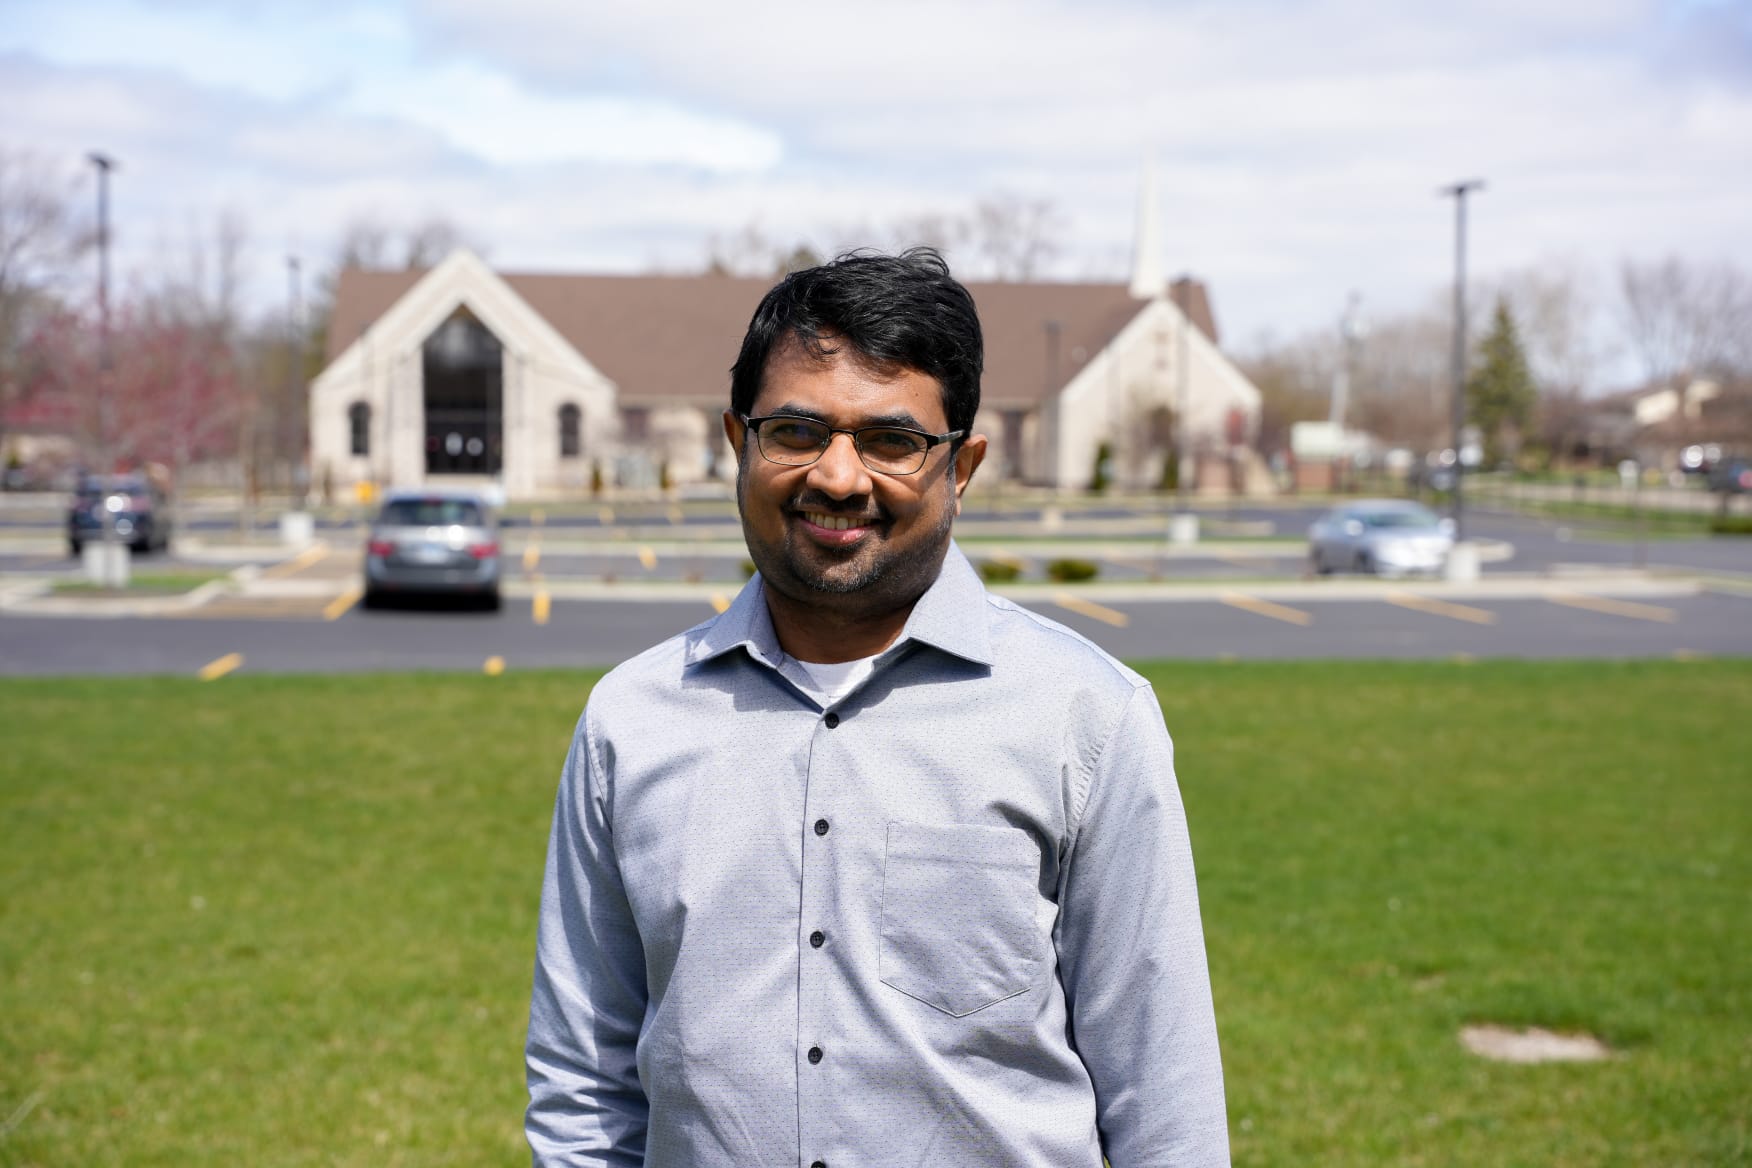 PhD Student Dax Sunny Mathew on Research, Persistence, and Making a Difference